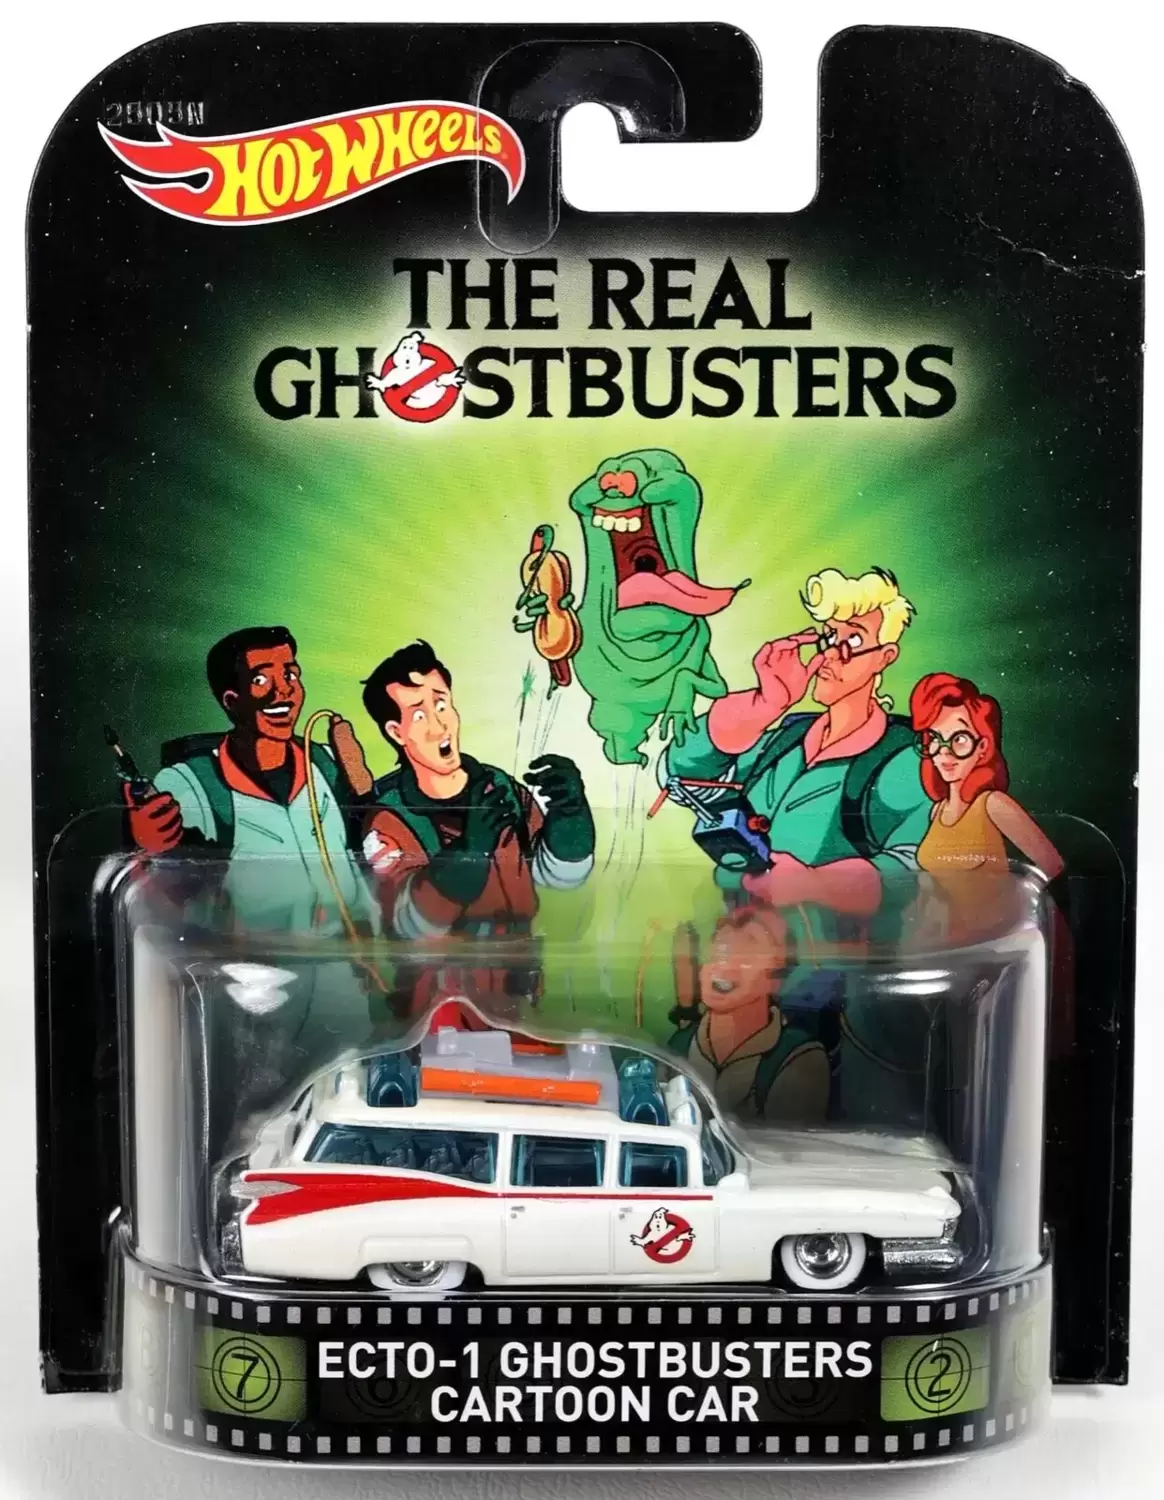 Retro Entertainment Hot Wheels - The Real Ghostbusters - Ecto-1 Ghostbusters Cartoon Car